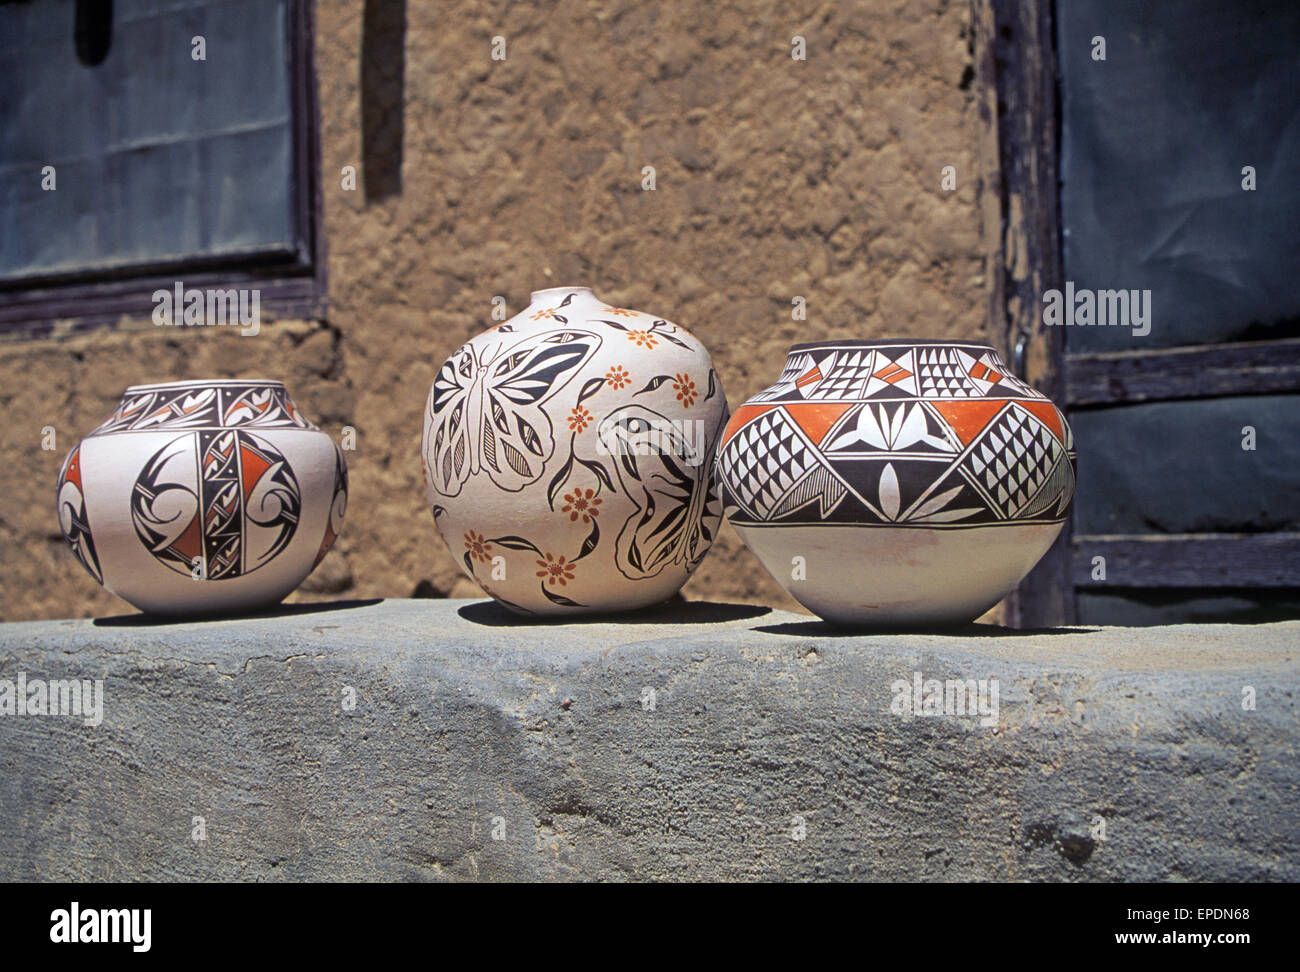 Three beautiful ceramic bowls made by an Acoma Indian potter, at Acoma Indian Pueblo in central New Mexico Stock Photo